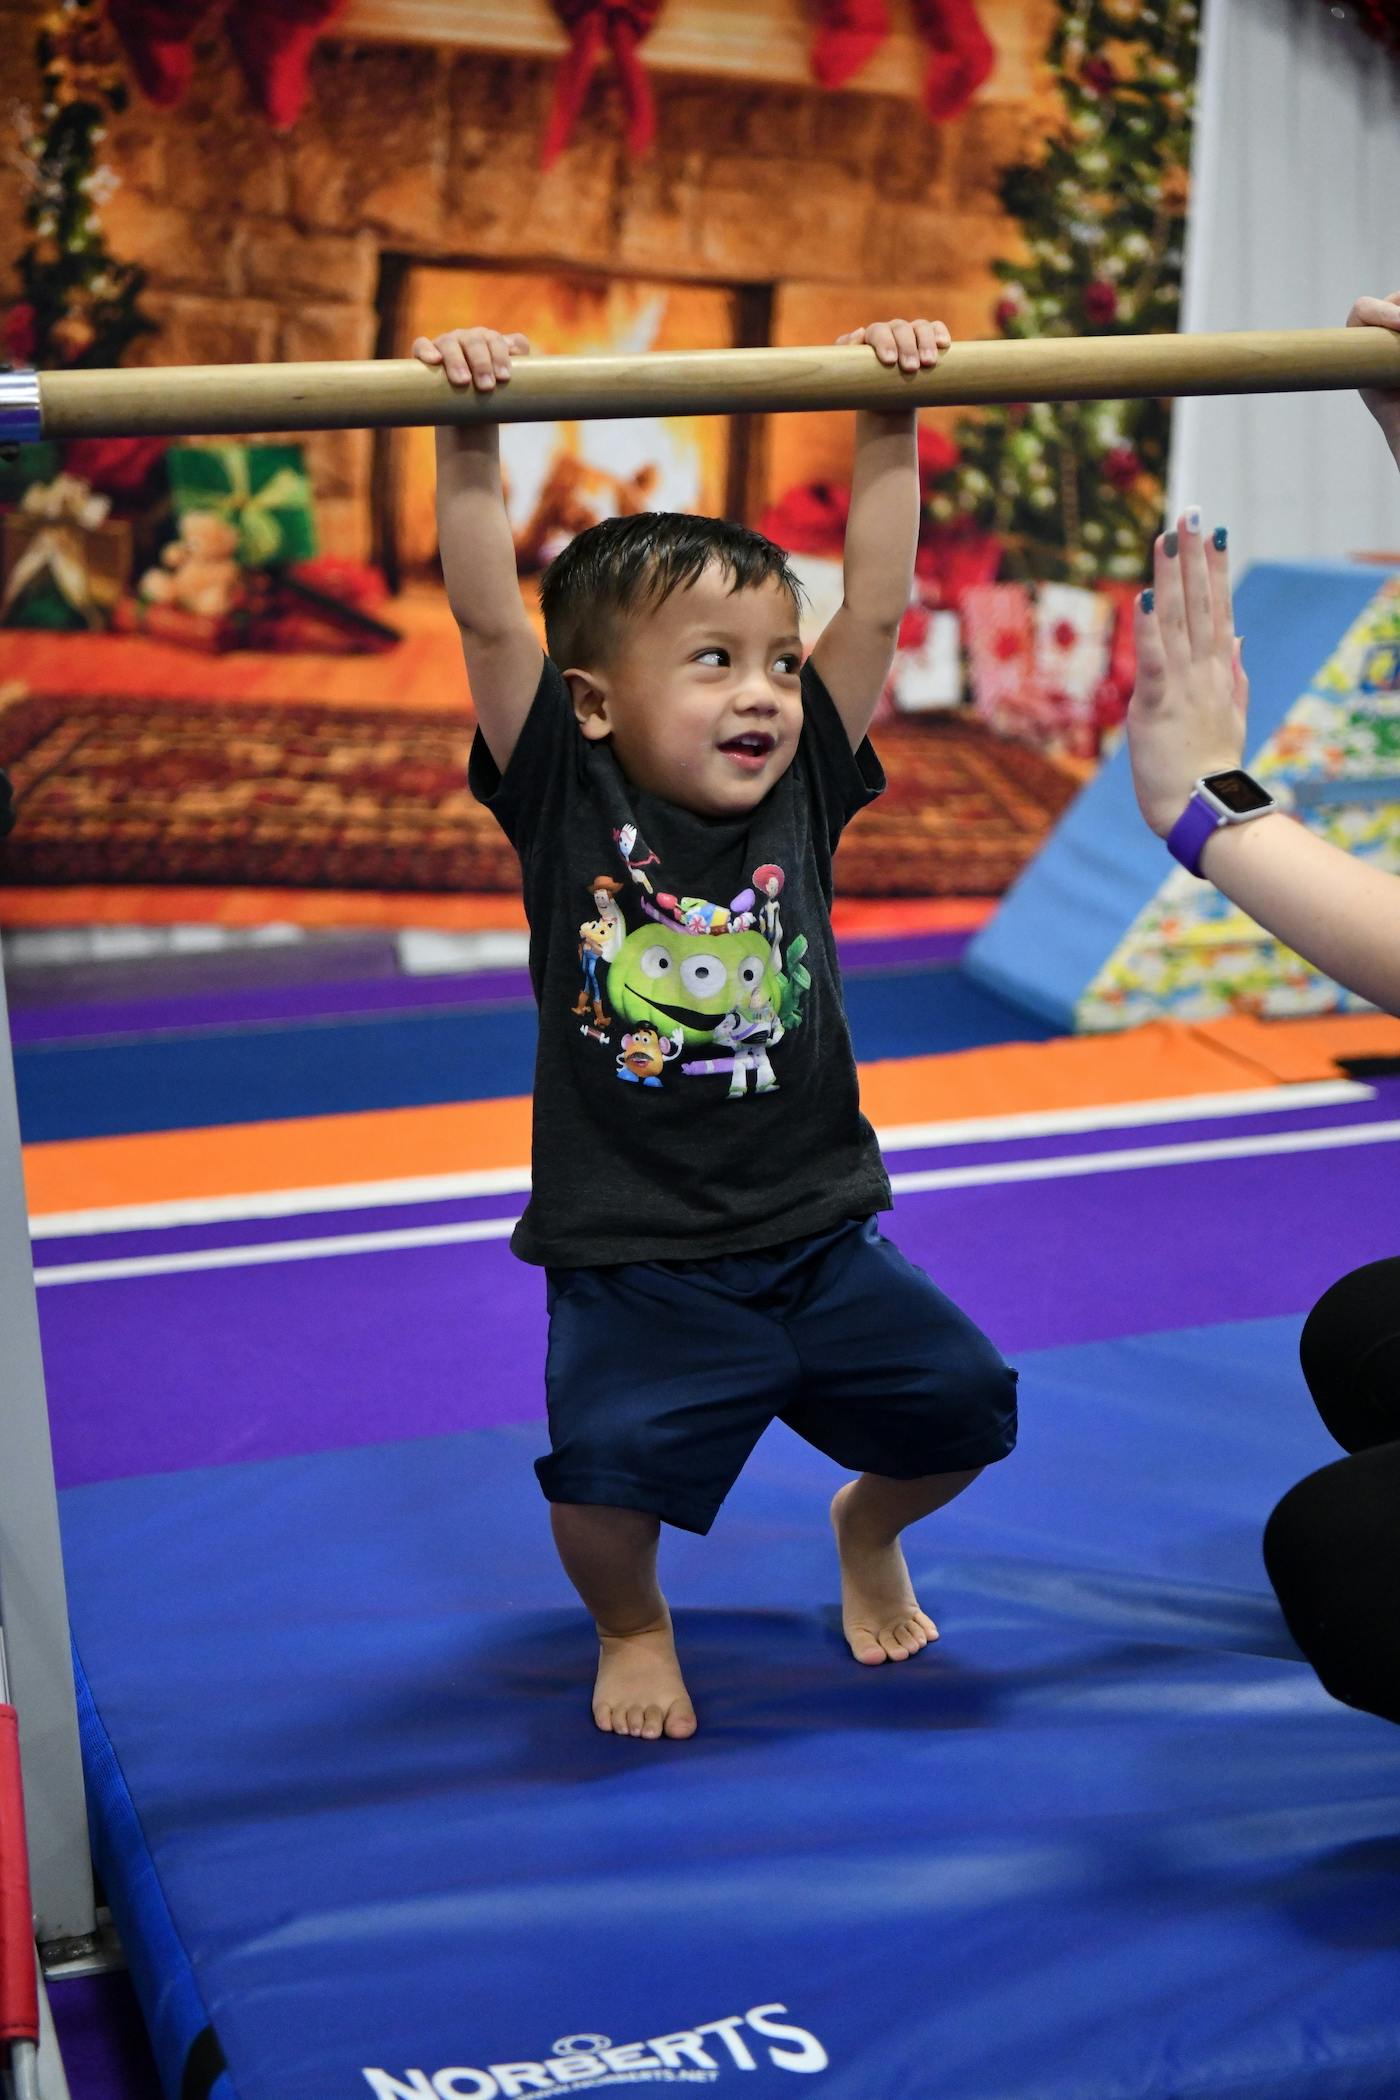 Preschool gymnastics classes are an excellent way for children to develop coordination, strength, and flexibility, in addition to fostering a lifelong appreciation of physical activity. Through various gymnastics activities, motor skills, coordination and balance are honed and improved.